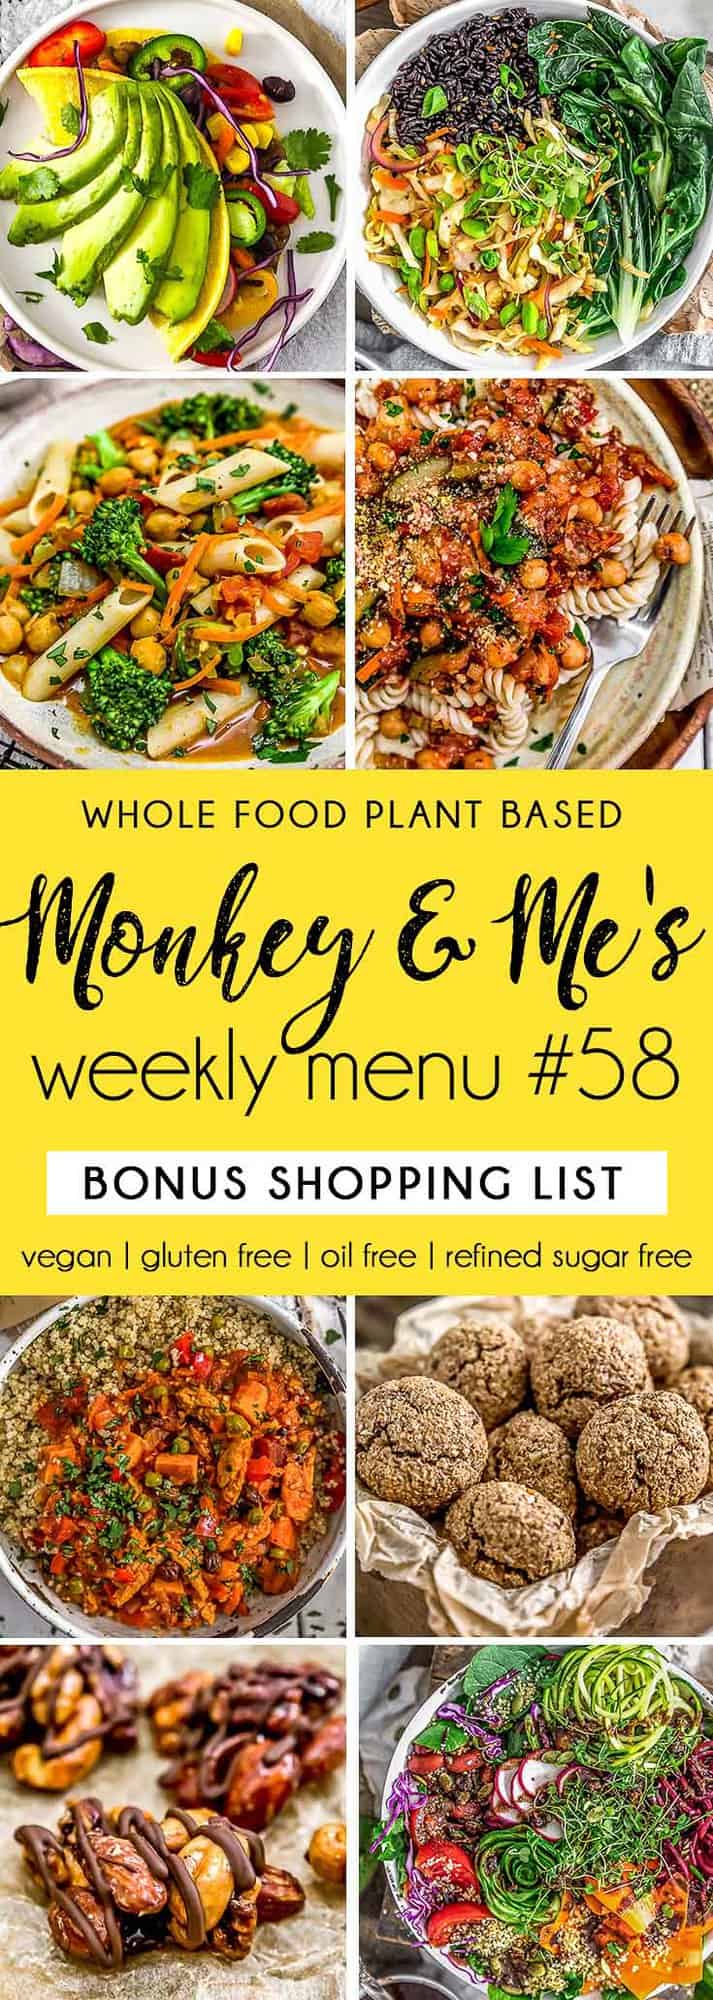 Monkey and Me's Menu 58 featuring 8 recipes